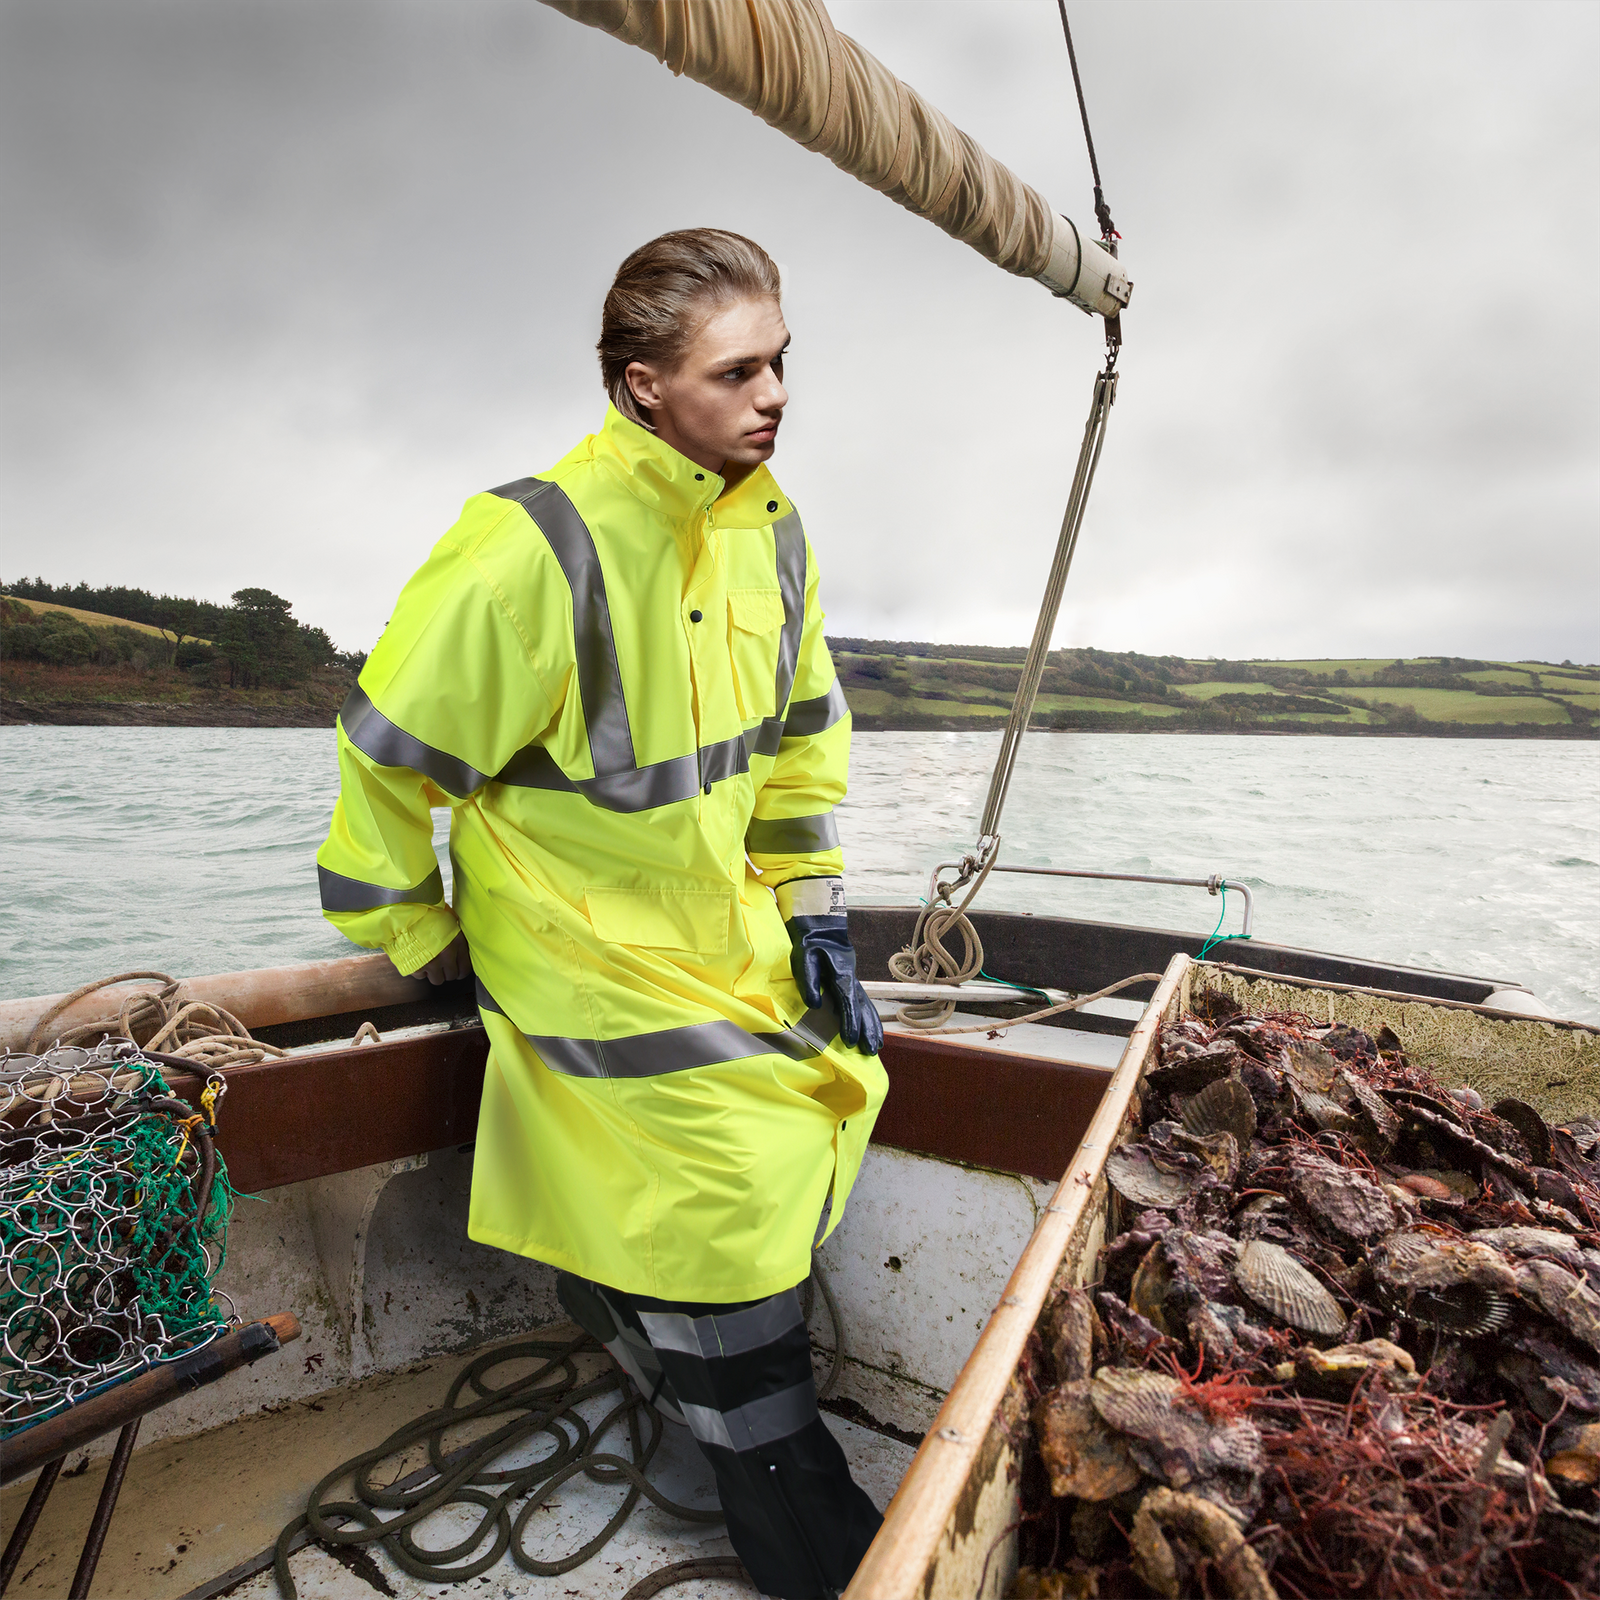 A fisherman standing on a boat while catching crabs wearing the Hi vis JORESTECH waterproof rain jacket in a cloudy day.